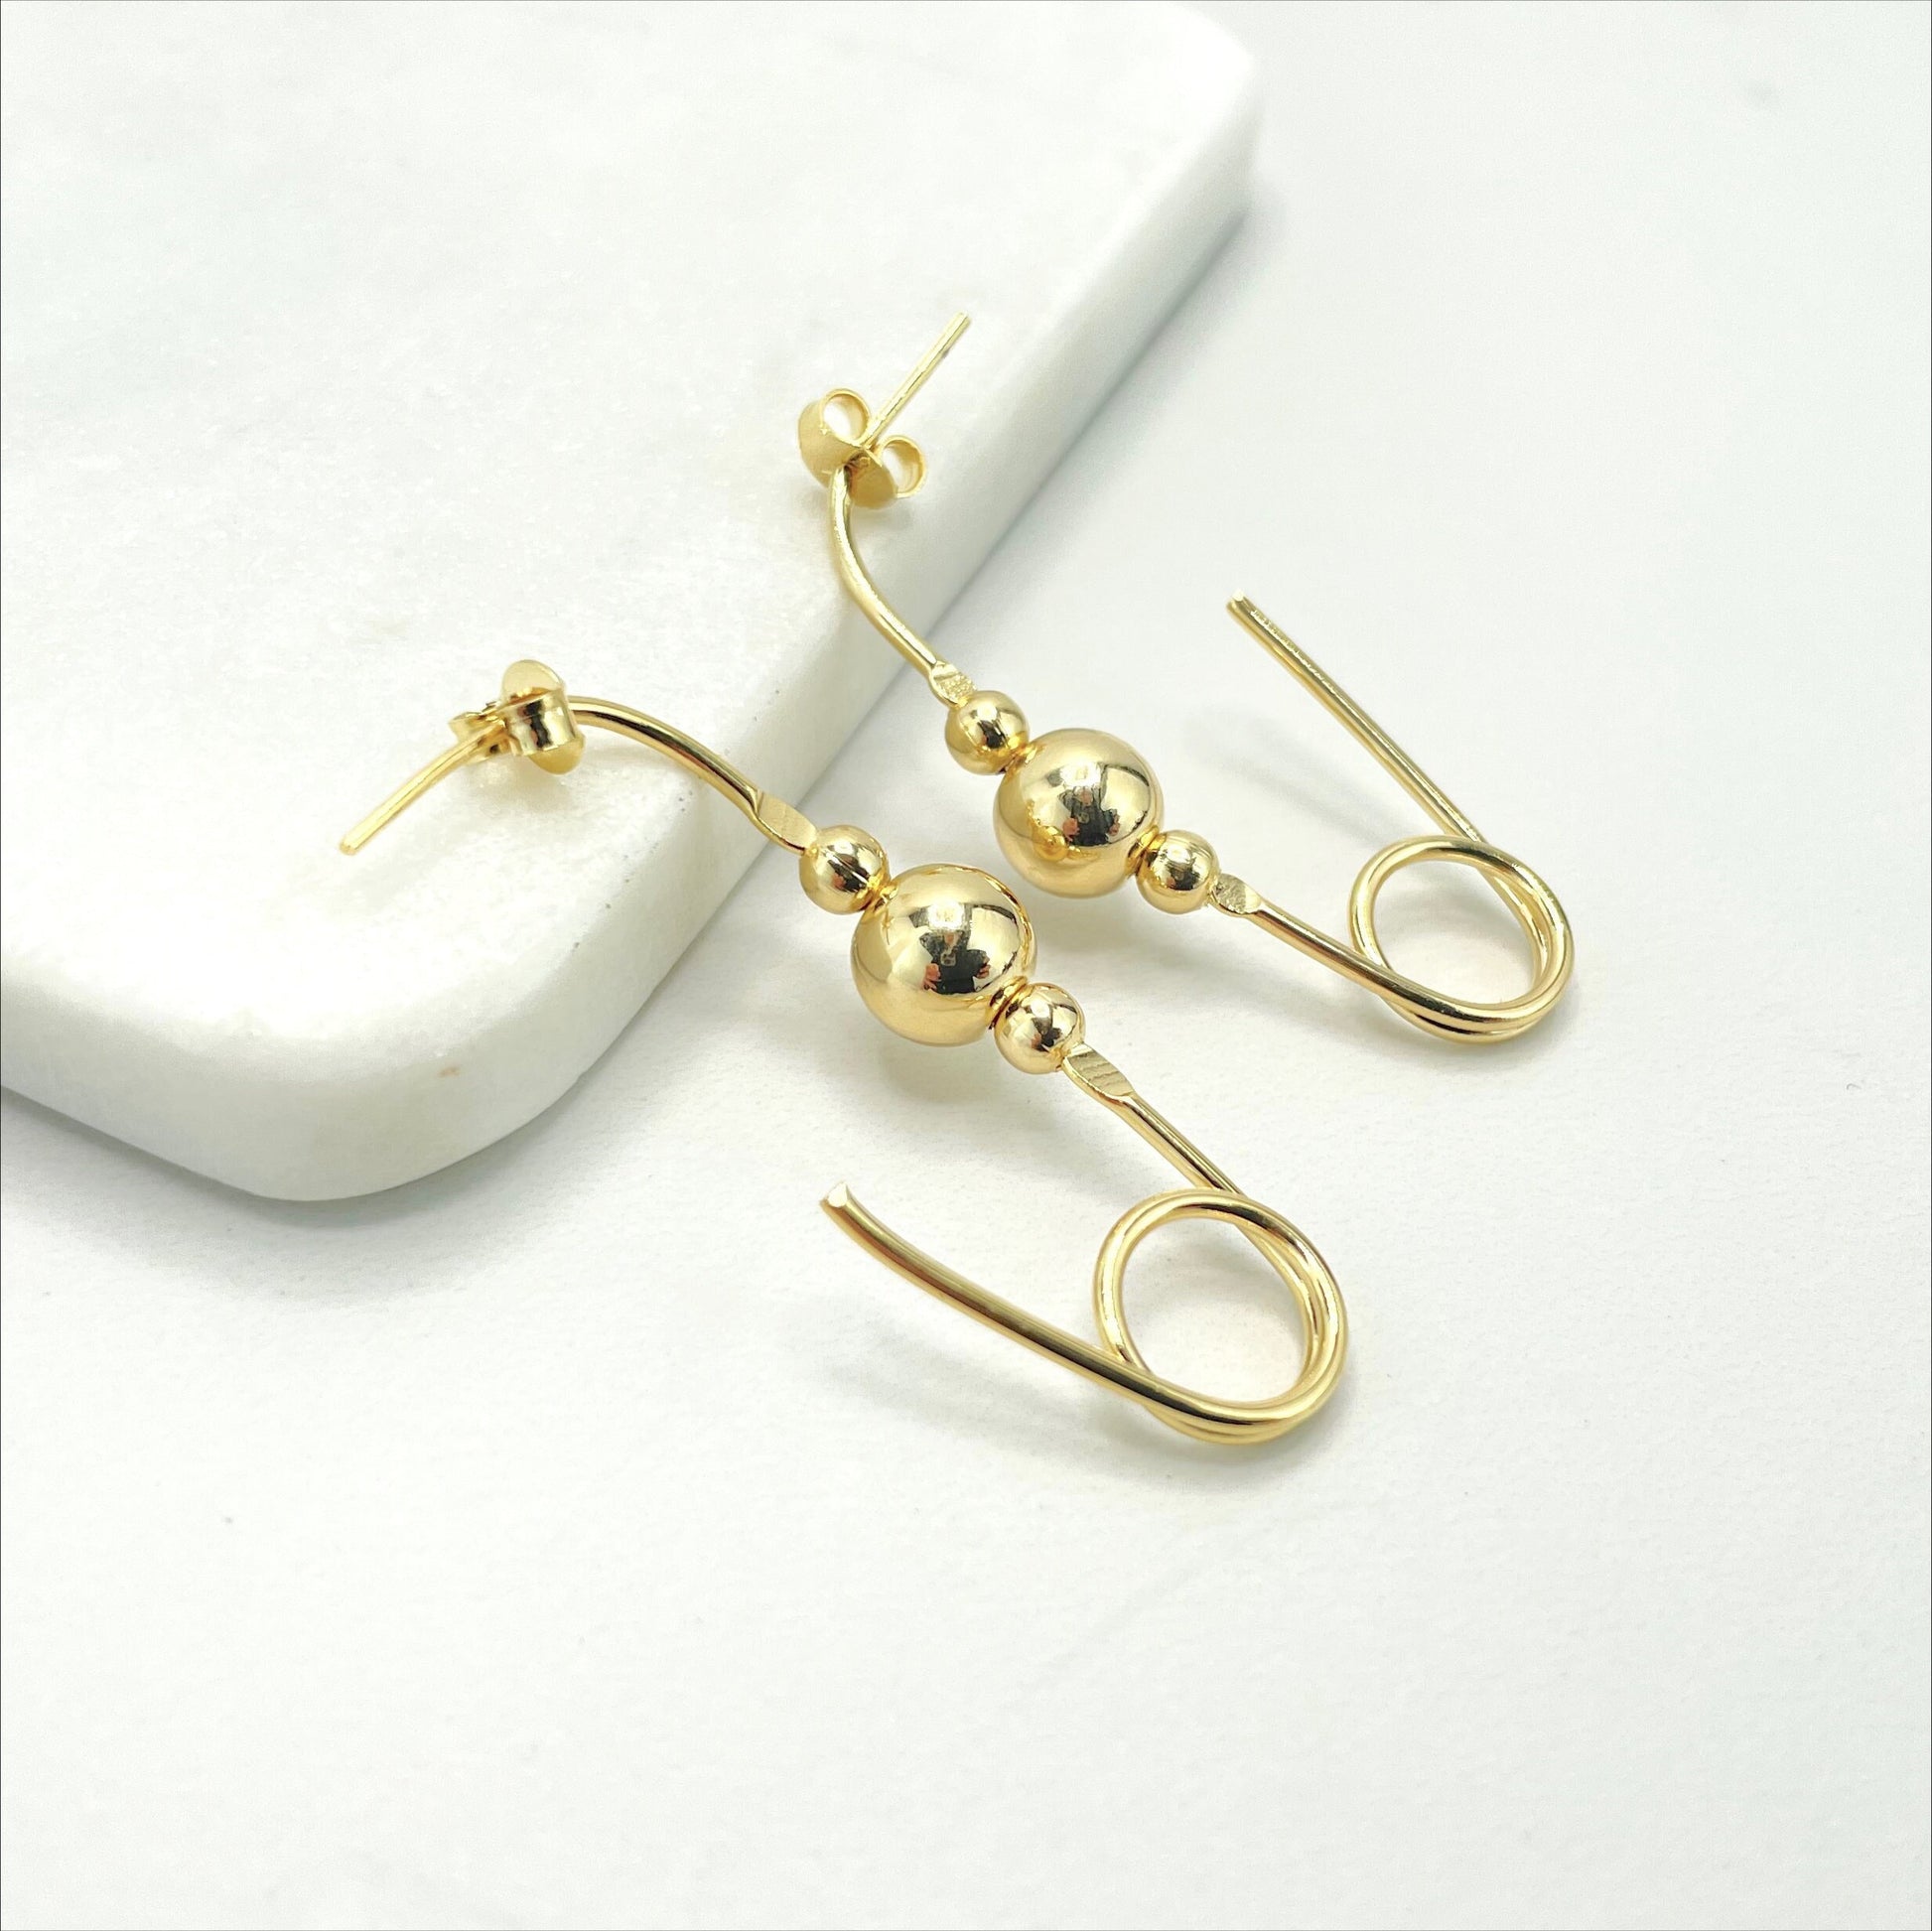 18k Gold Filled Safety Pin Design Drop Earrings With Gold Ball, Push Back Closure, Wholesale Jewelry Making Supplies